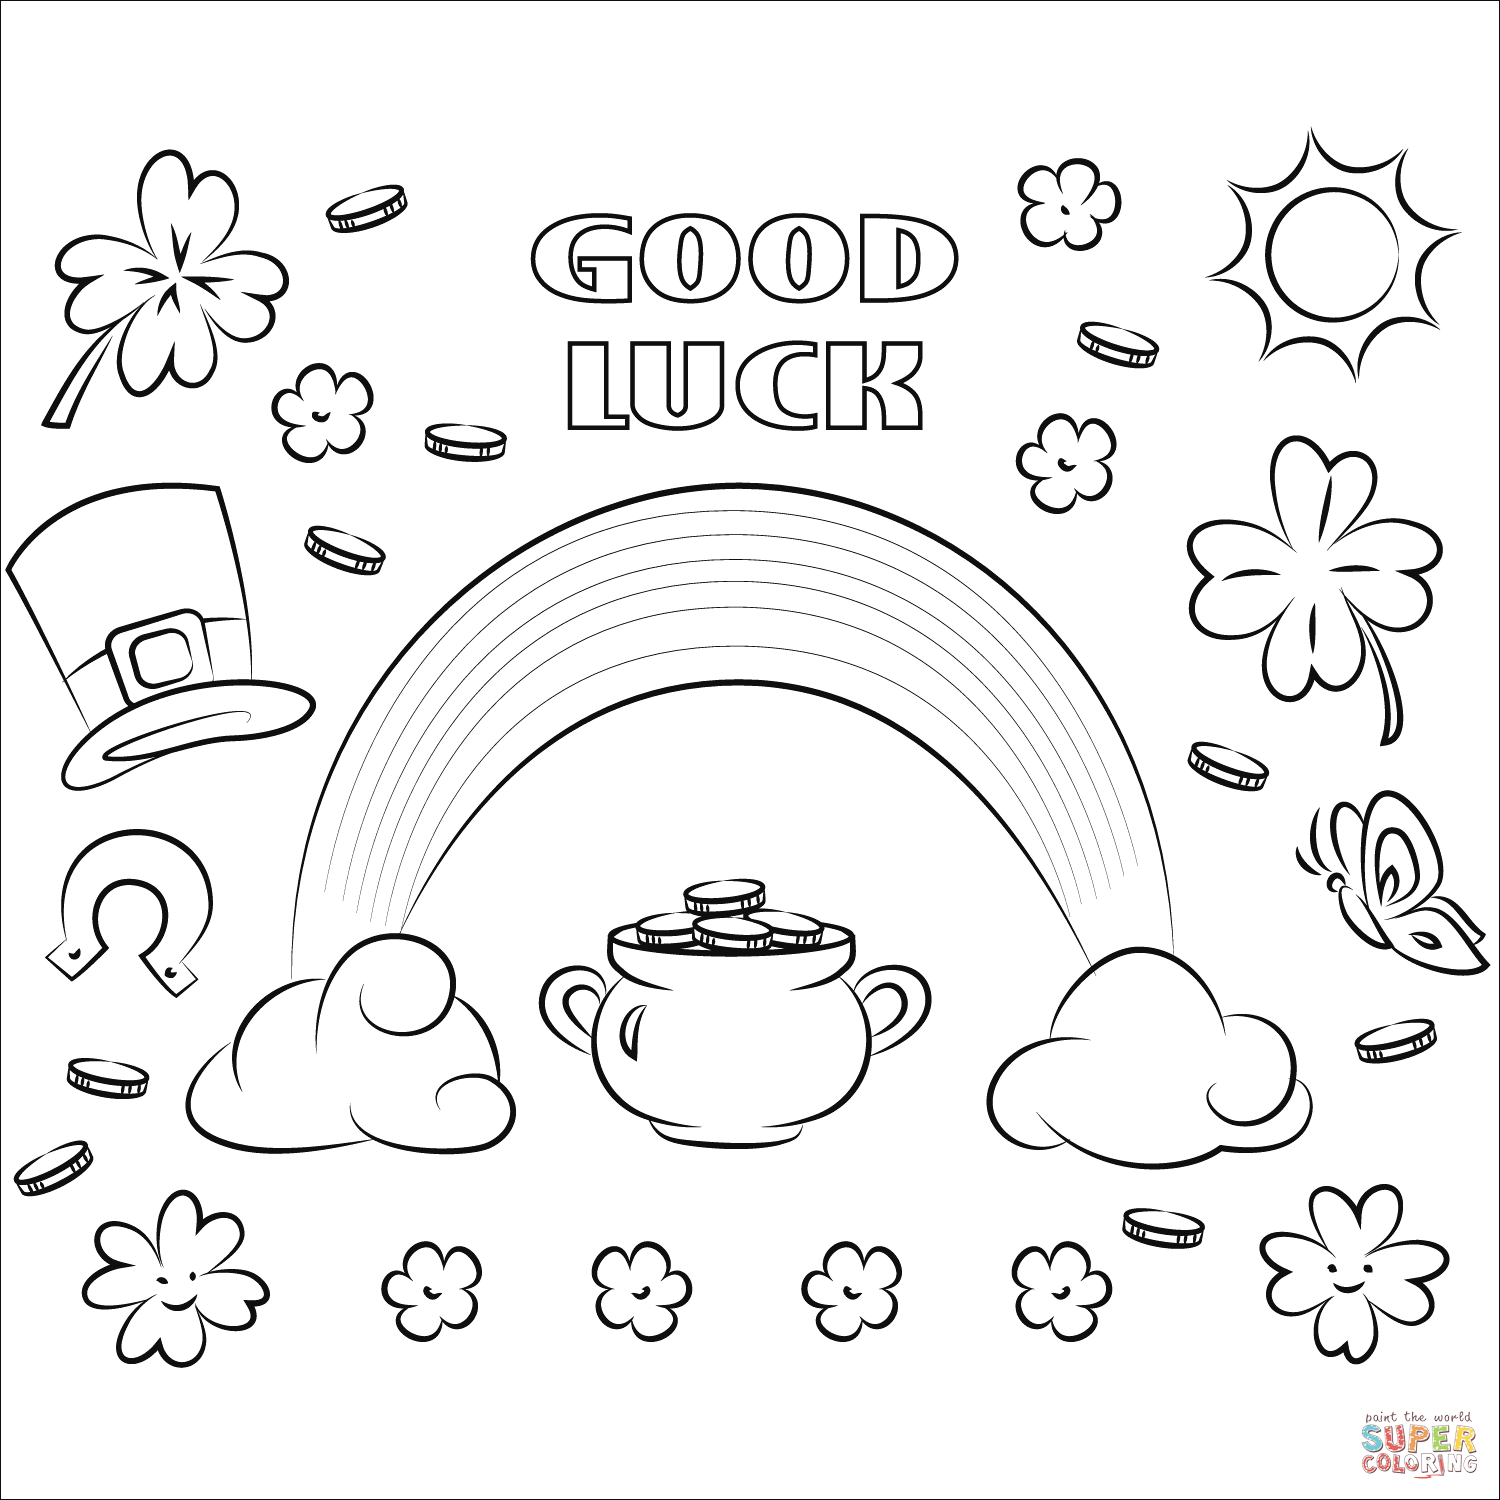 Good luck coloring page free printable coloring pages